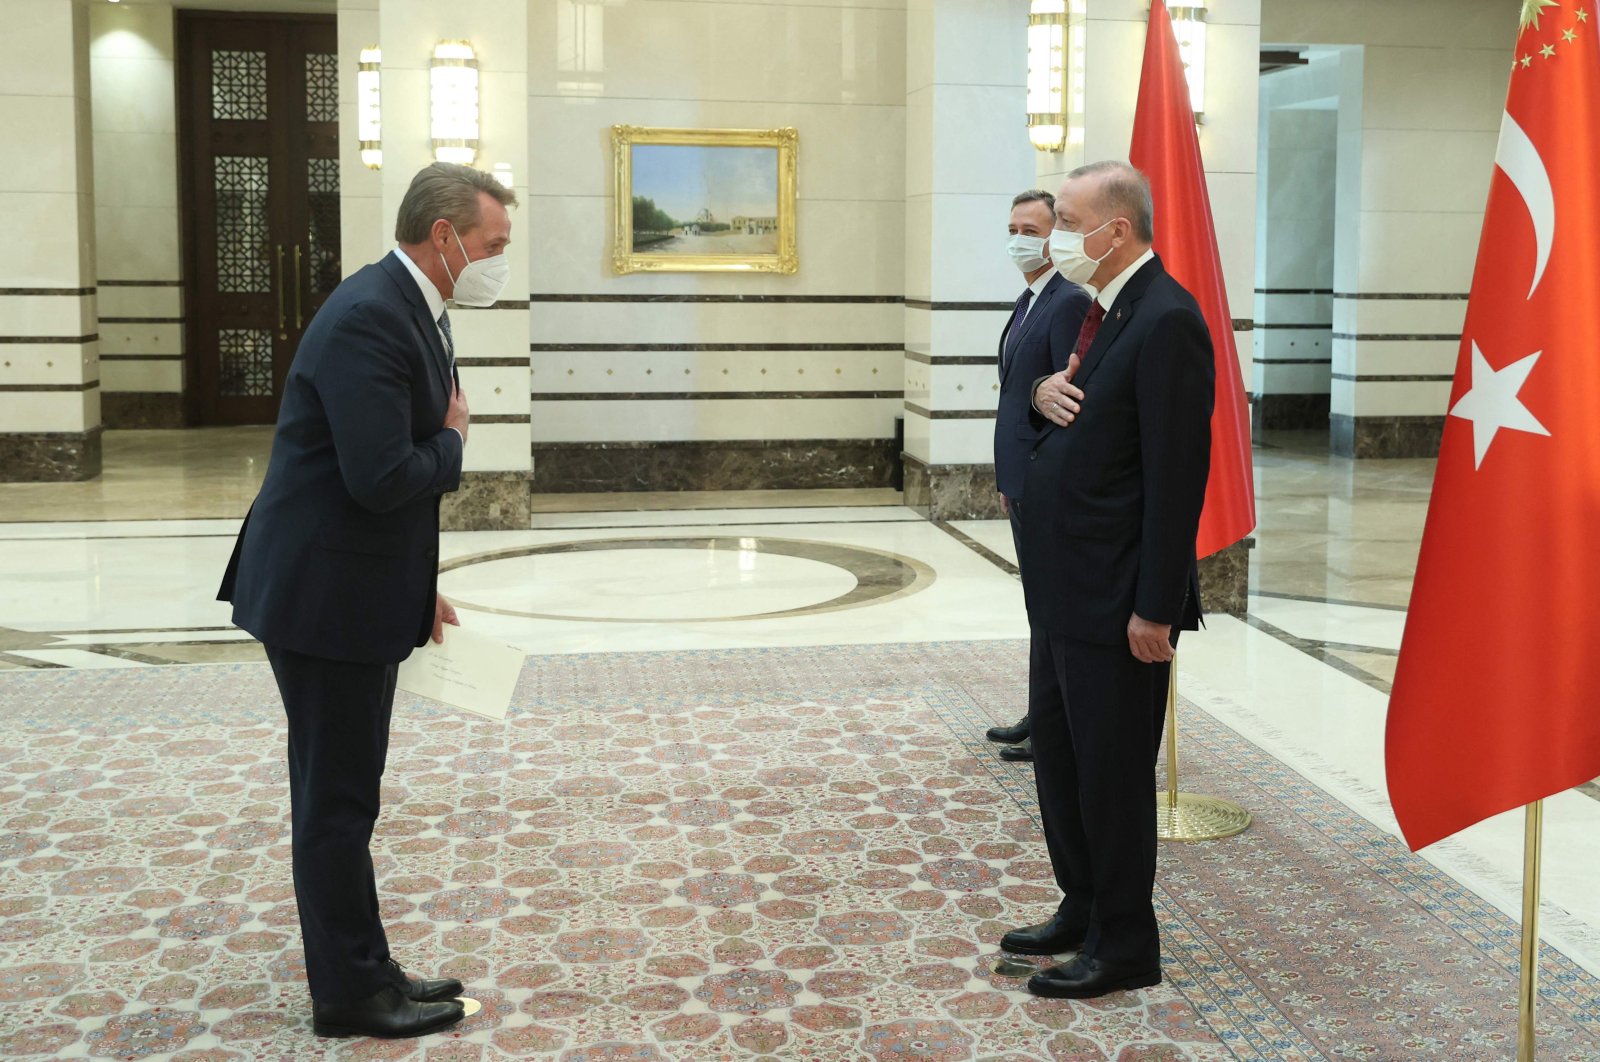 President Recep Tayyip Erdoğan (R) meets with the newly appointed U.S. Ambassador to Turkey Jeff Flake (L) at the Presidential Complex in Ankara, Turkey, Jan. 26, 2022. (Photo by TURKISH PRESIDENTIAL PRESS SERVICE / AFP)